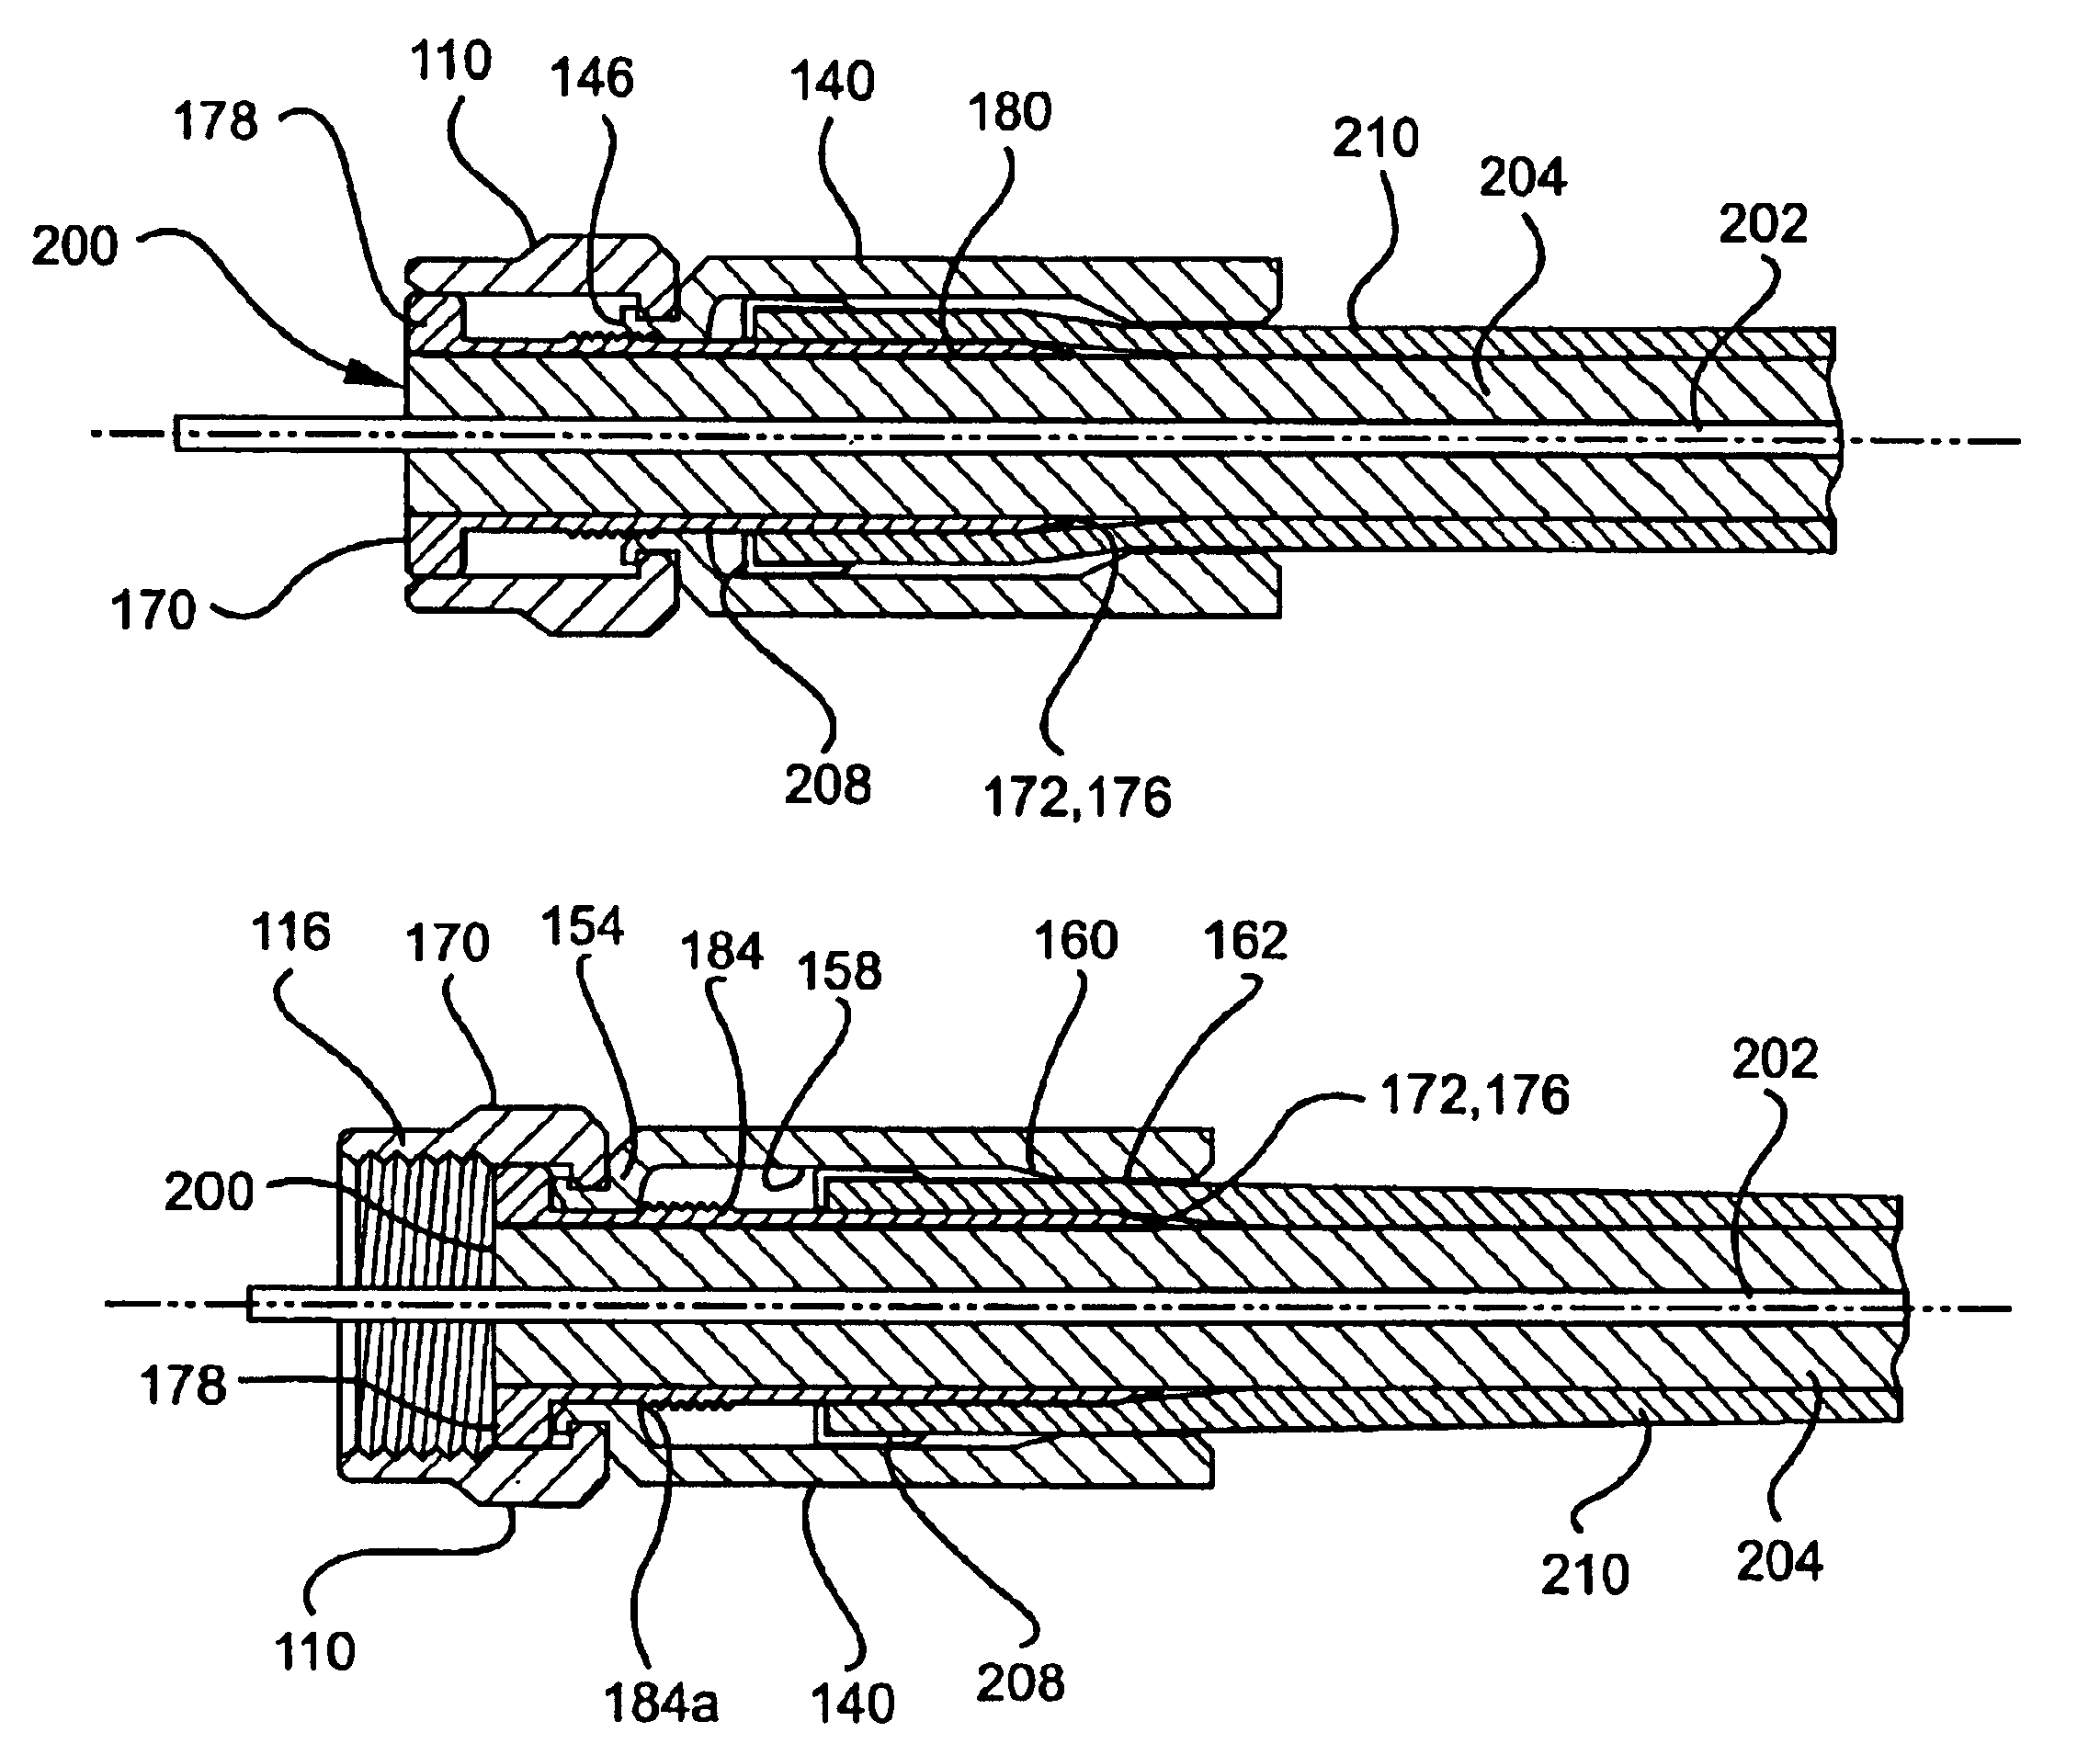 Sealed coaxial cable connector and related method